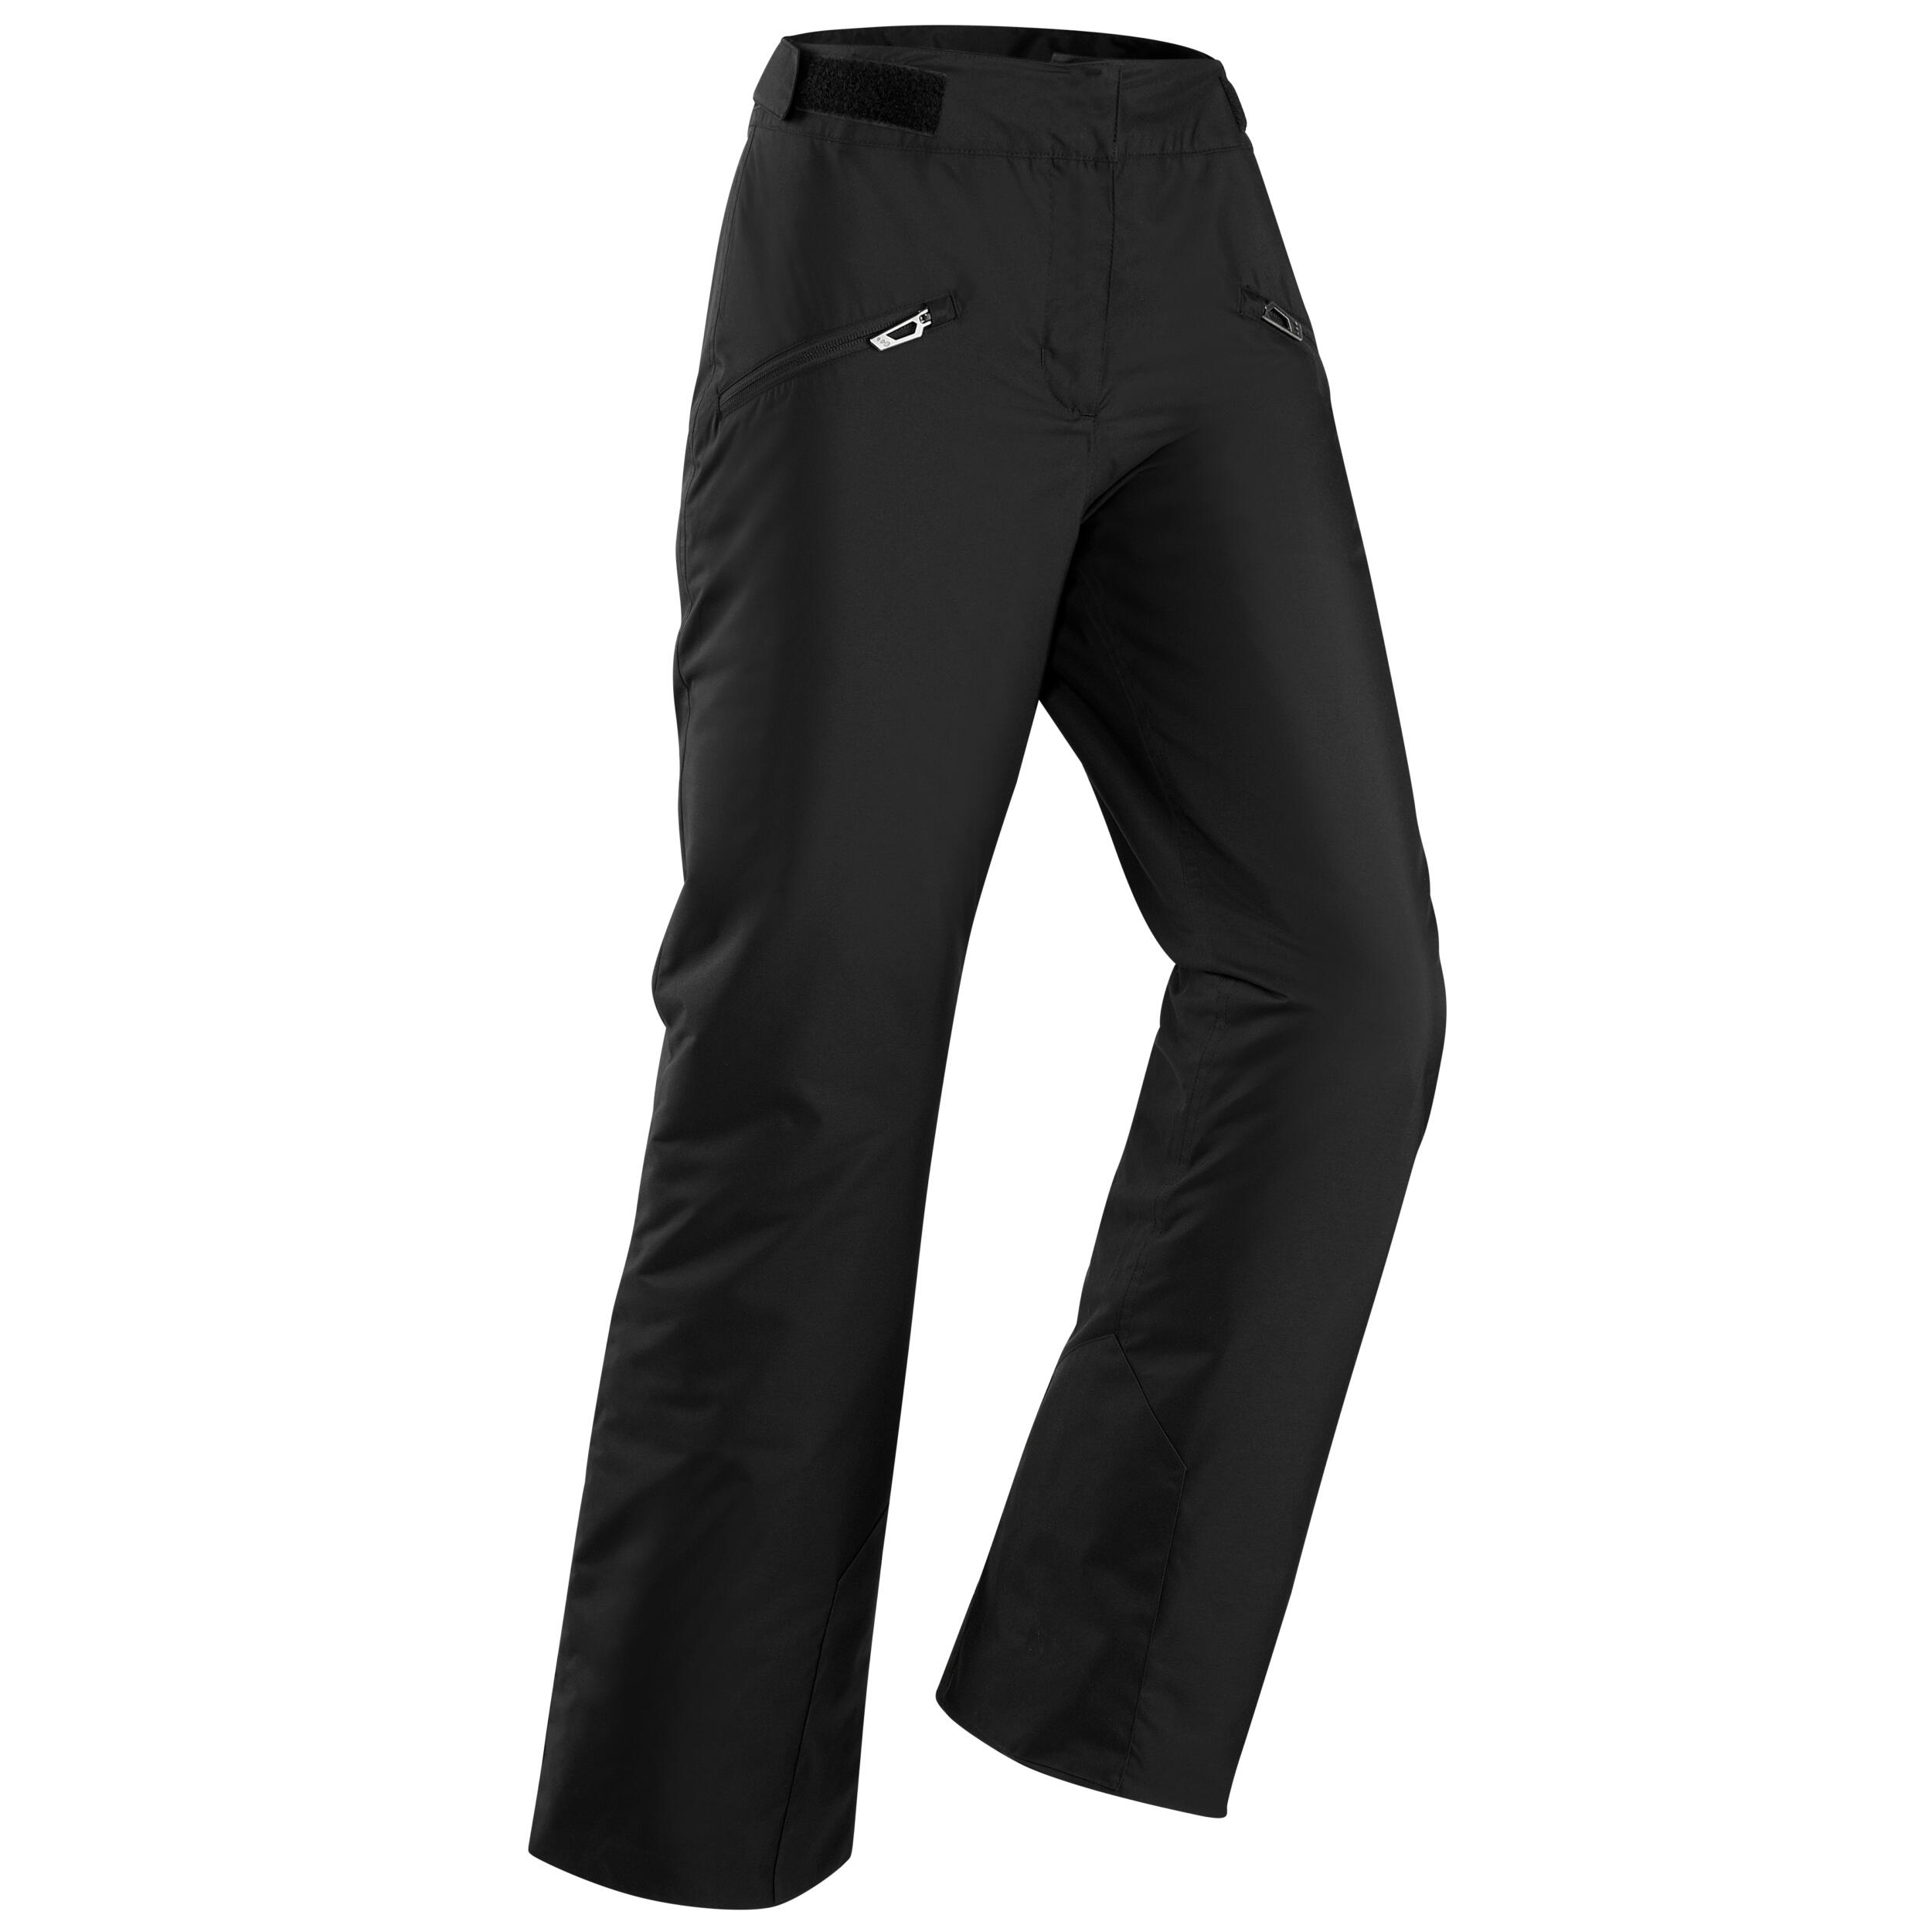 Buy Decathlon Kids Pink Ski Warm Trousers from the Laura Ashley online shop